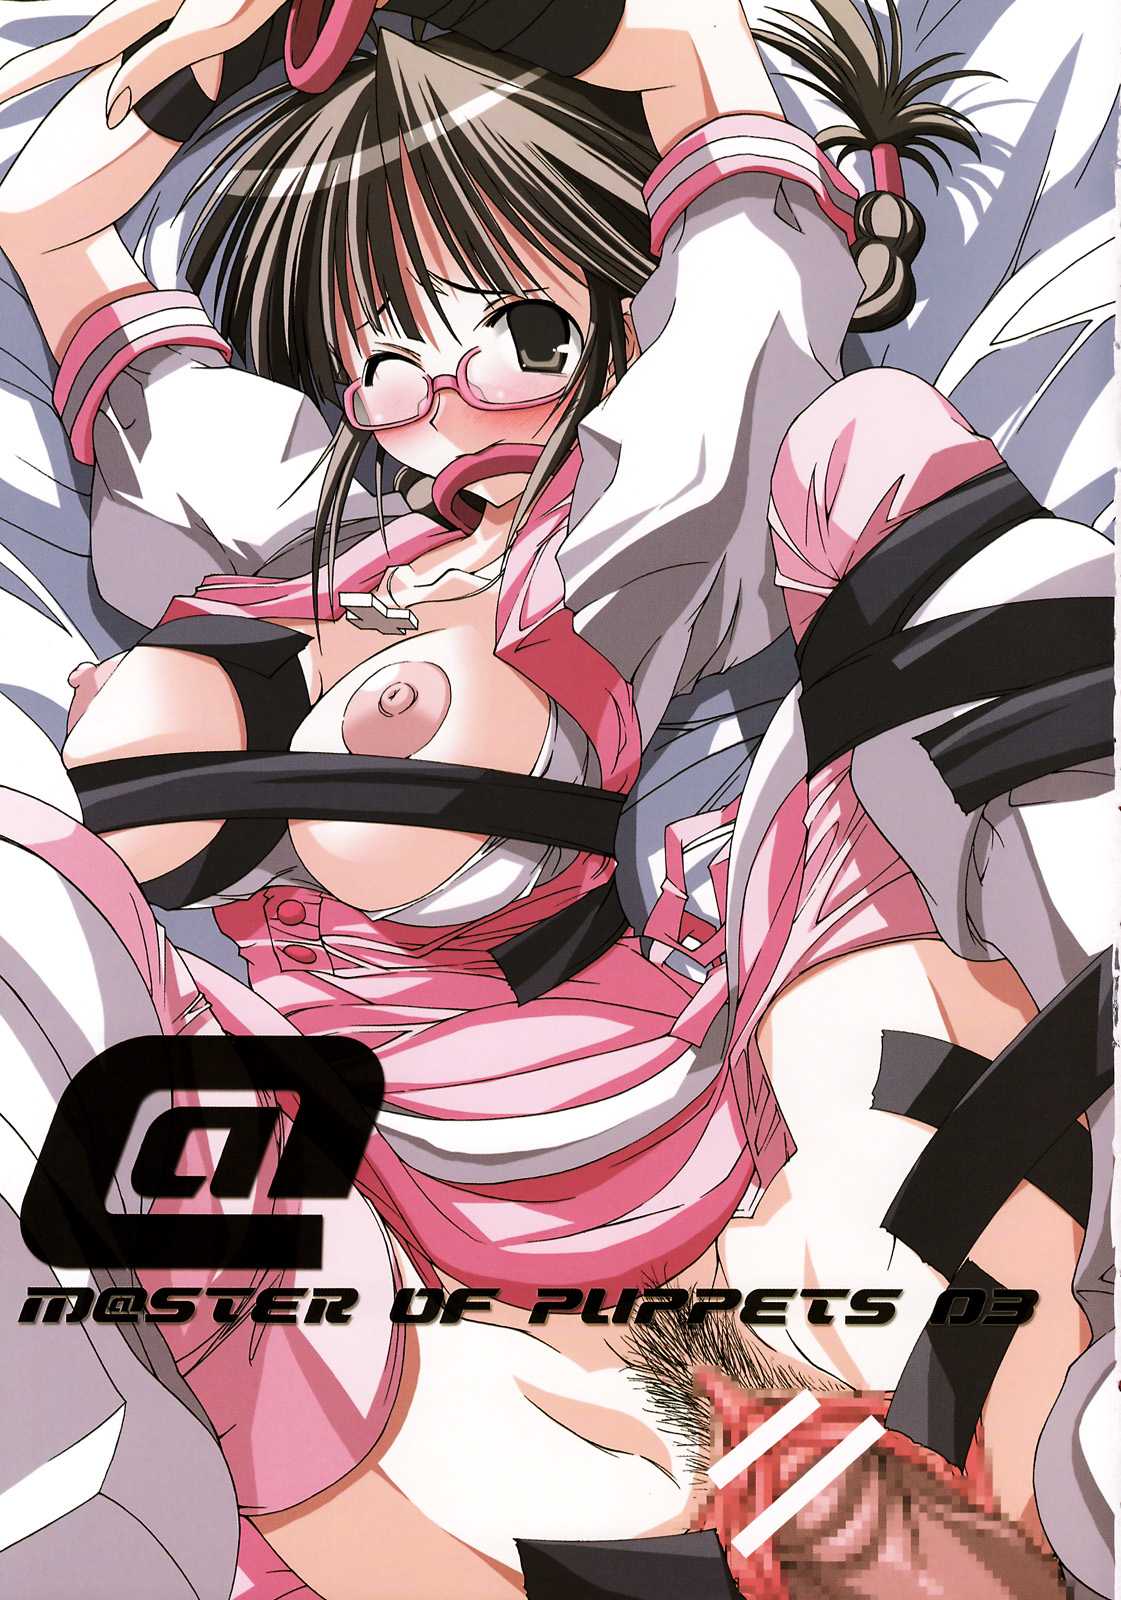 [Chu-ni +OUT OF SIGHT]  M@STER OF PUPPETS 03 {The IDOLM@STER} {masterbloodfer} 